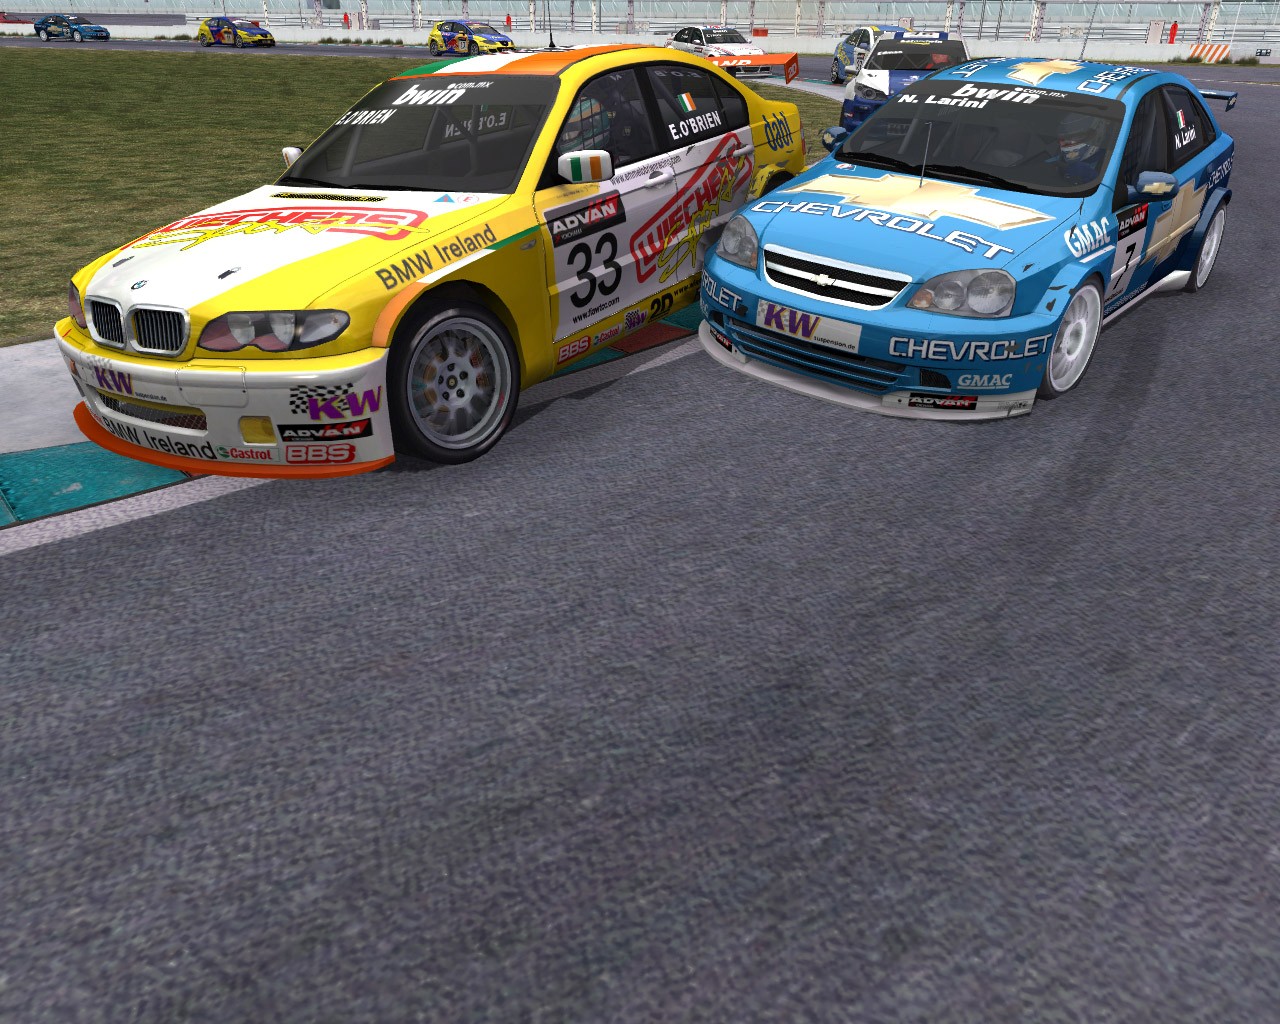       2008 Foto+RACE:+The+Official+WTCC+Game